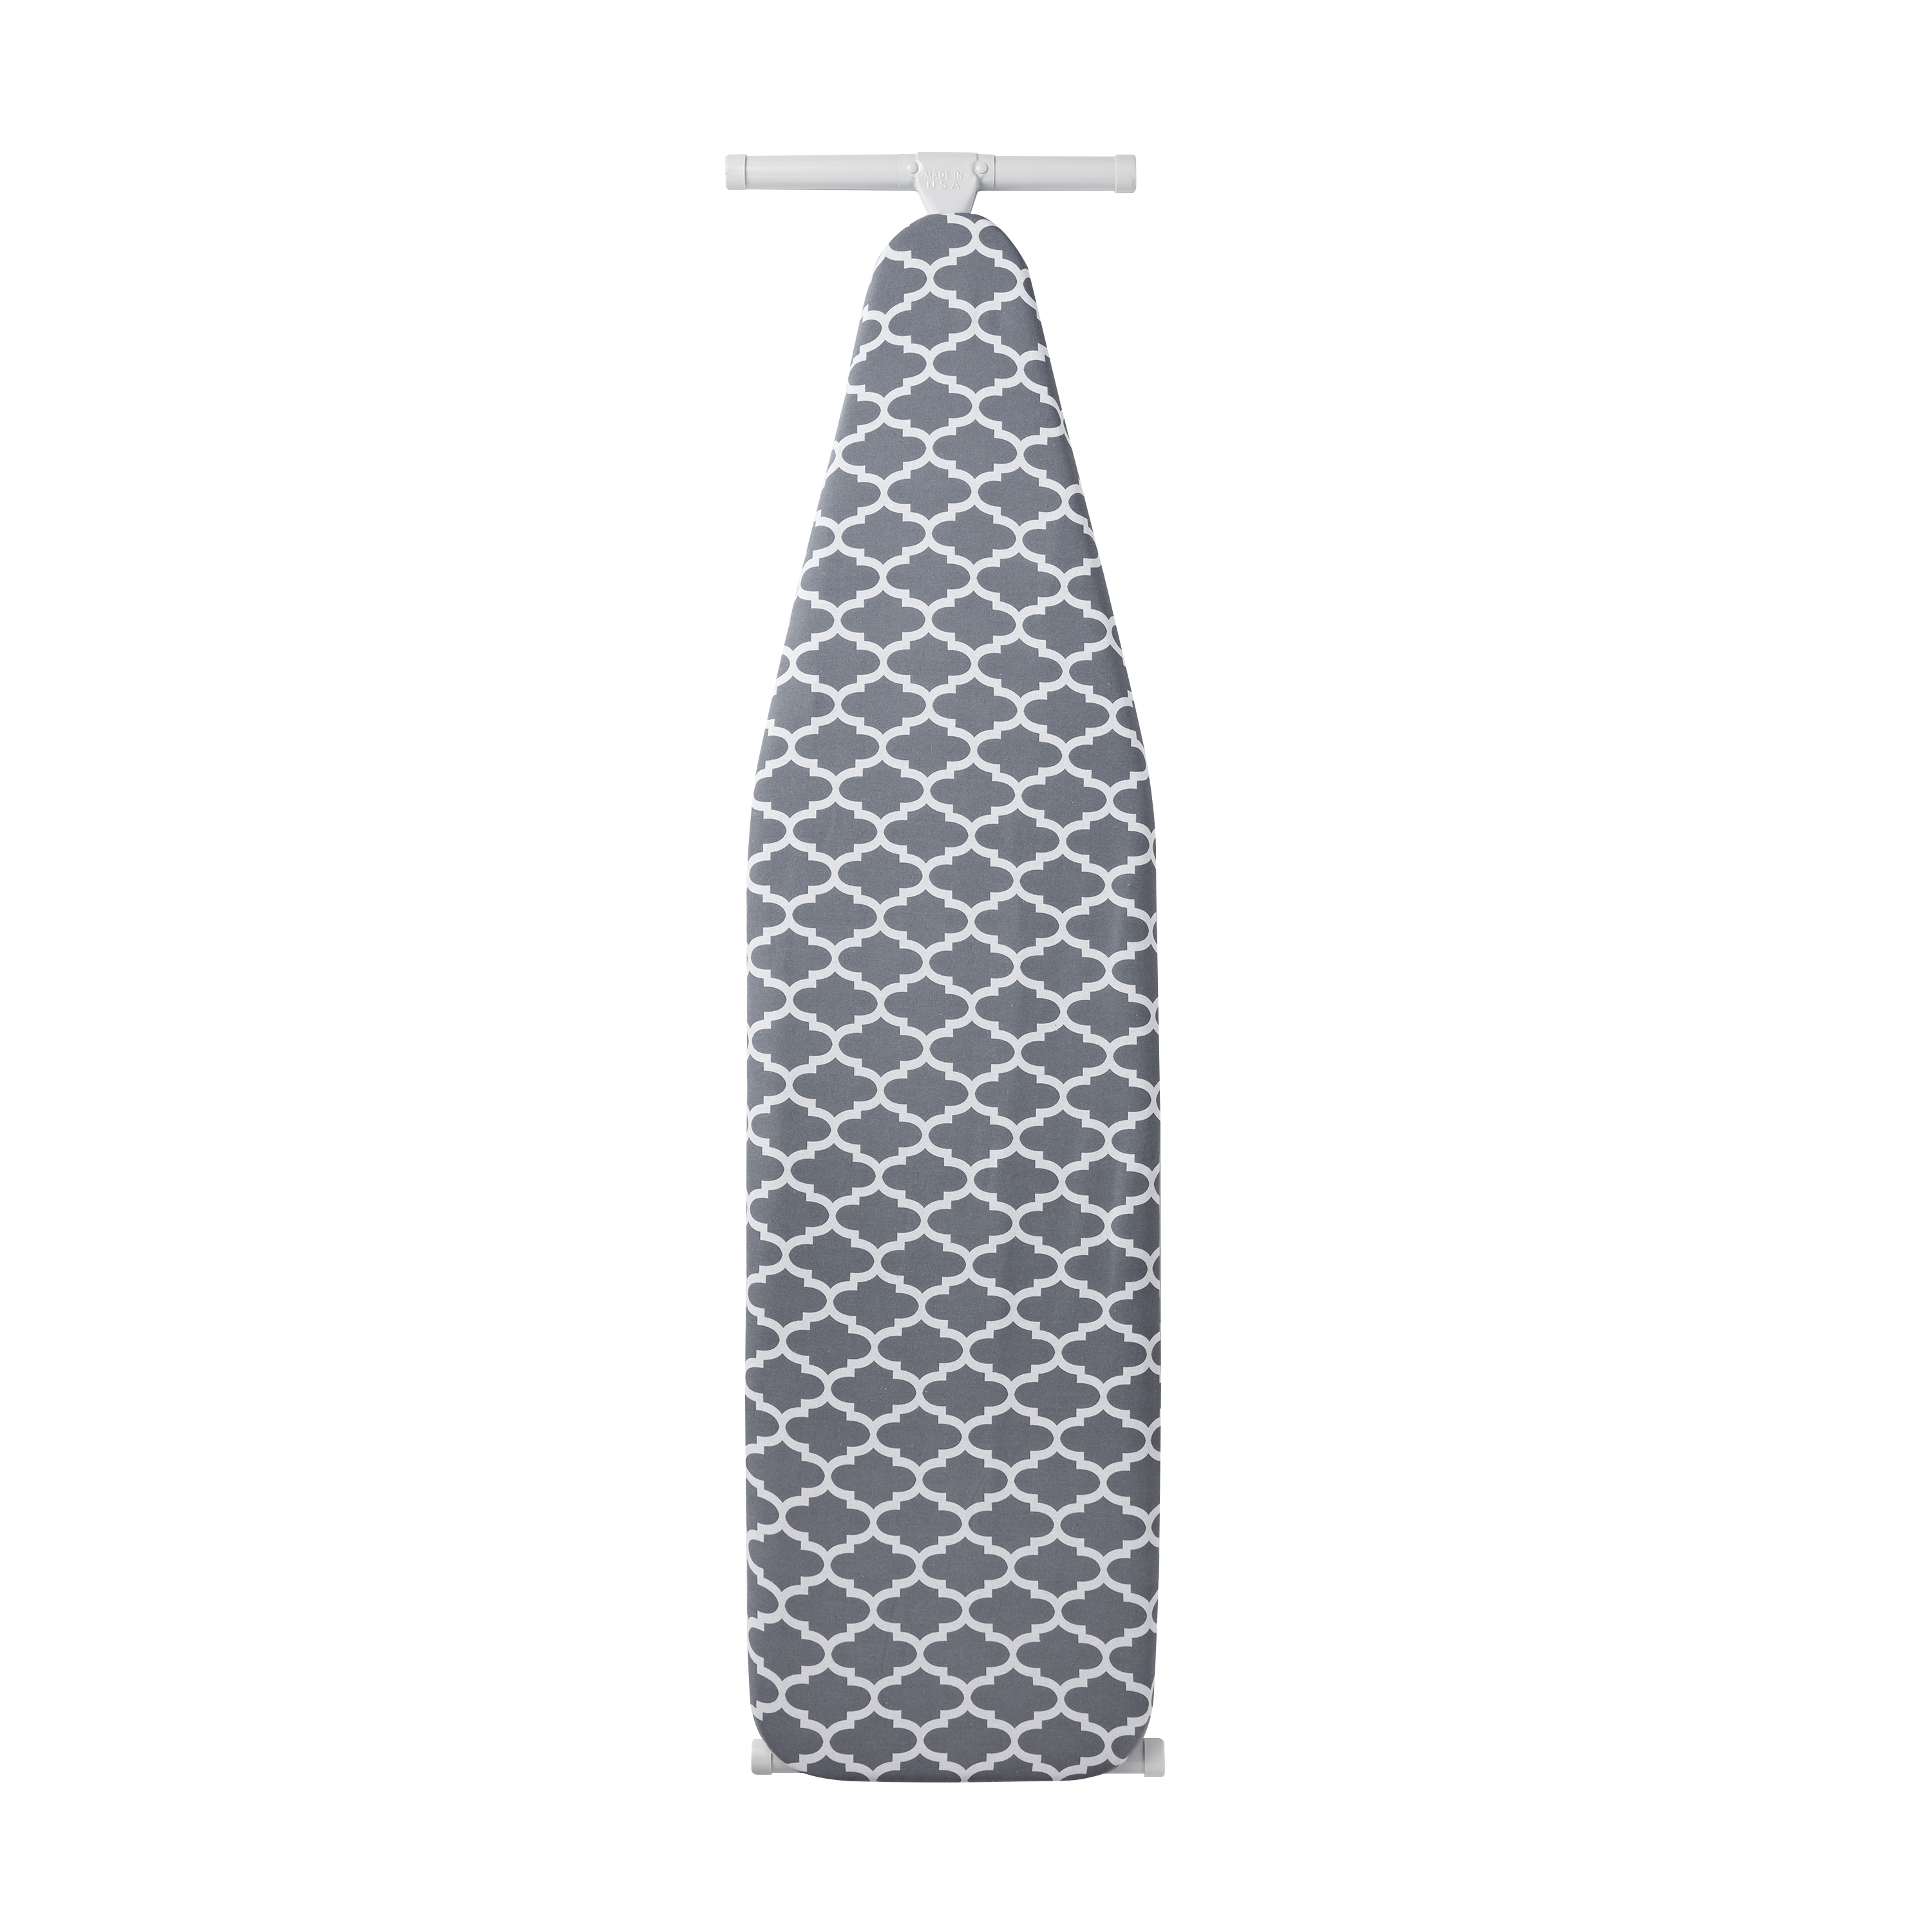 Mainstays Deluxe Lattice Grey Removable Ironing Board Cover 54" x 15" (Ironing board not included) - image 1 of 4